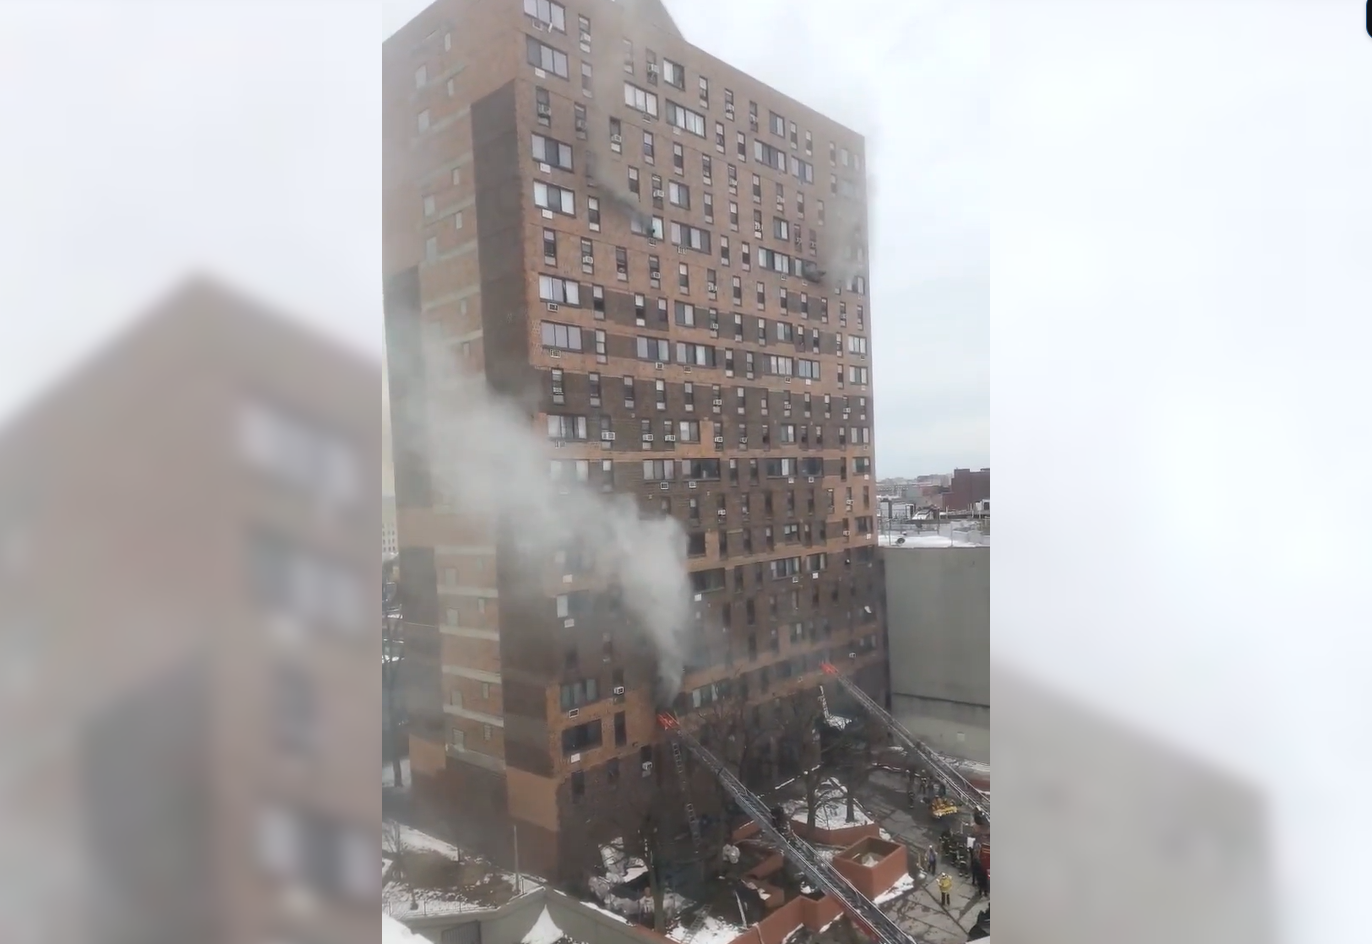 19 people, including 9 children, killed in apartment fire in New York